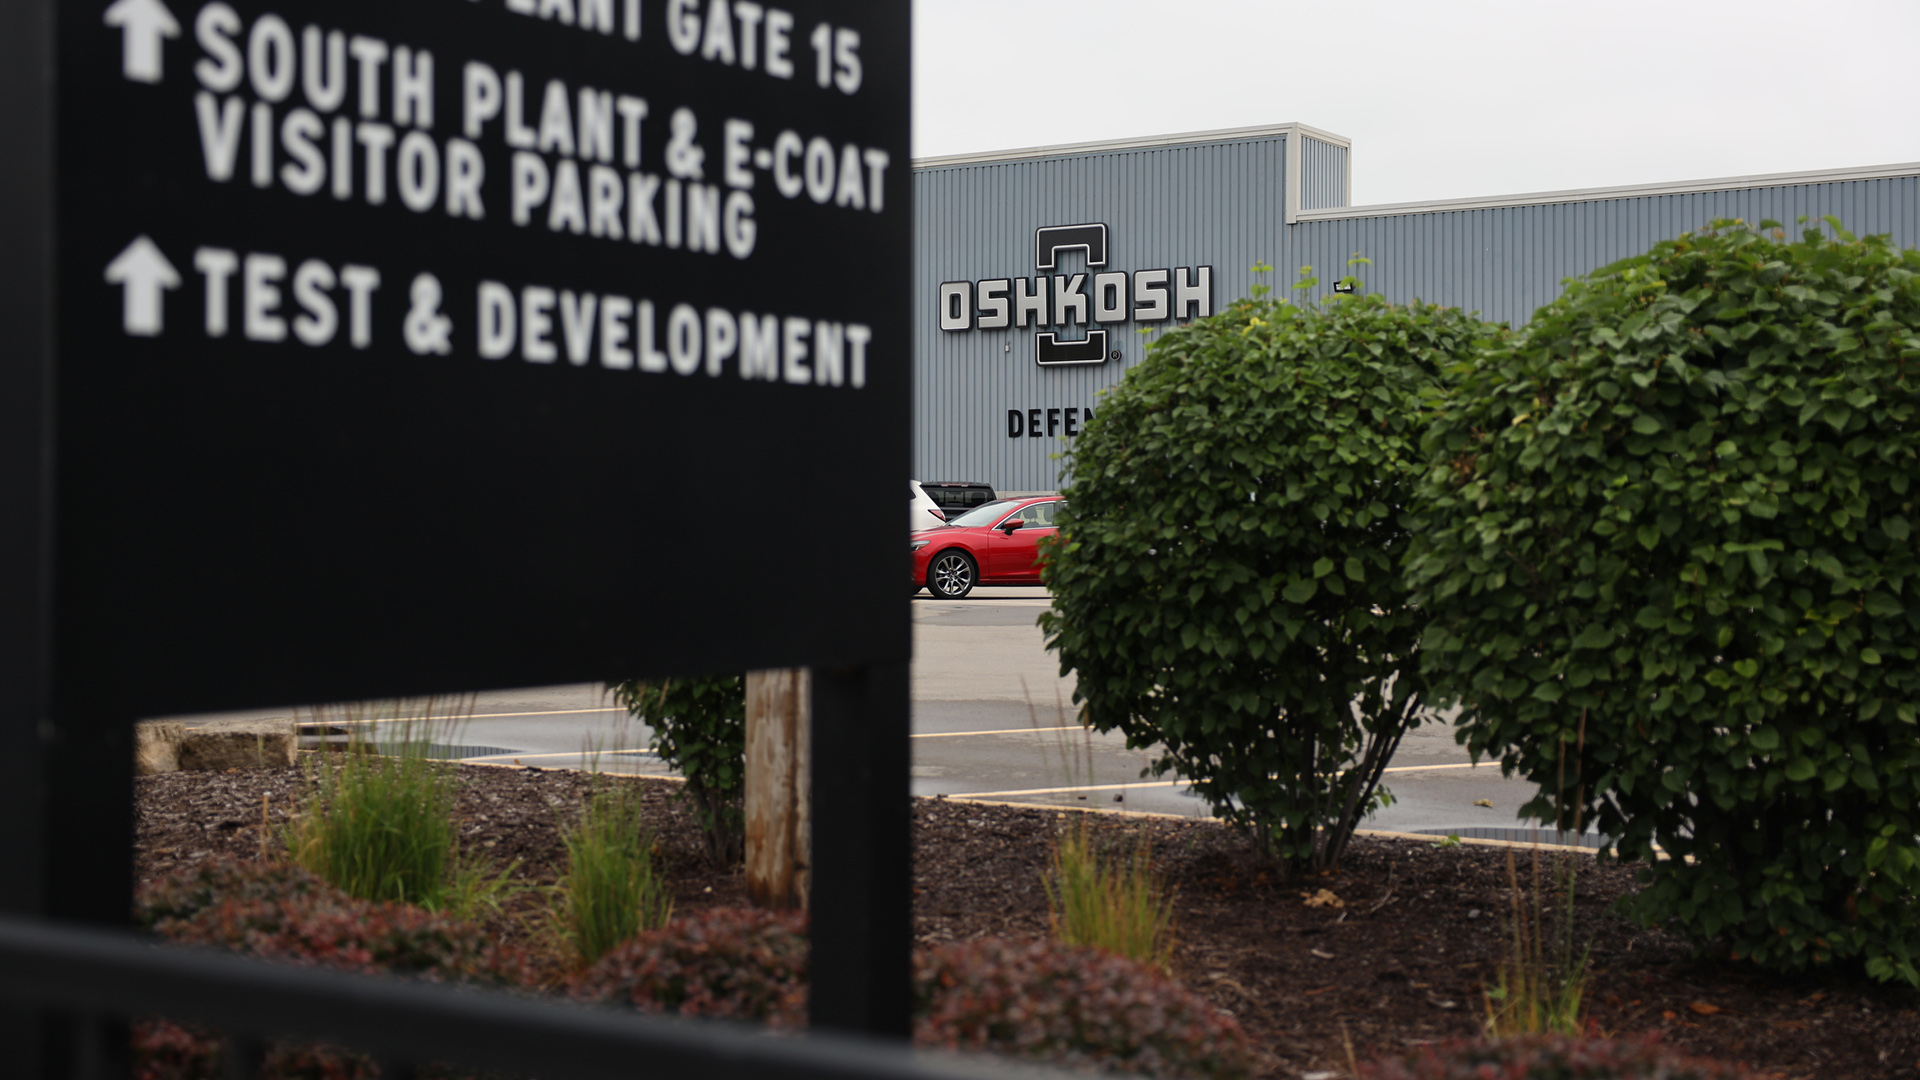 The wordmark for Oshkosh Defense is on the wall of a low-slung building with corrugated metal siding , with bushes and a sign with arrows pointing to "South Plant & E-Coat Visitor Parking" and "Test & Development" in the foreground.